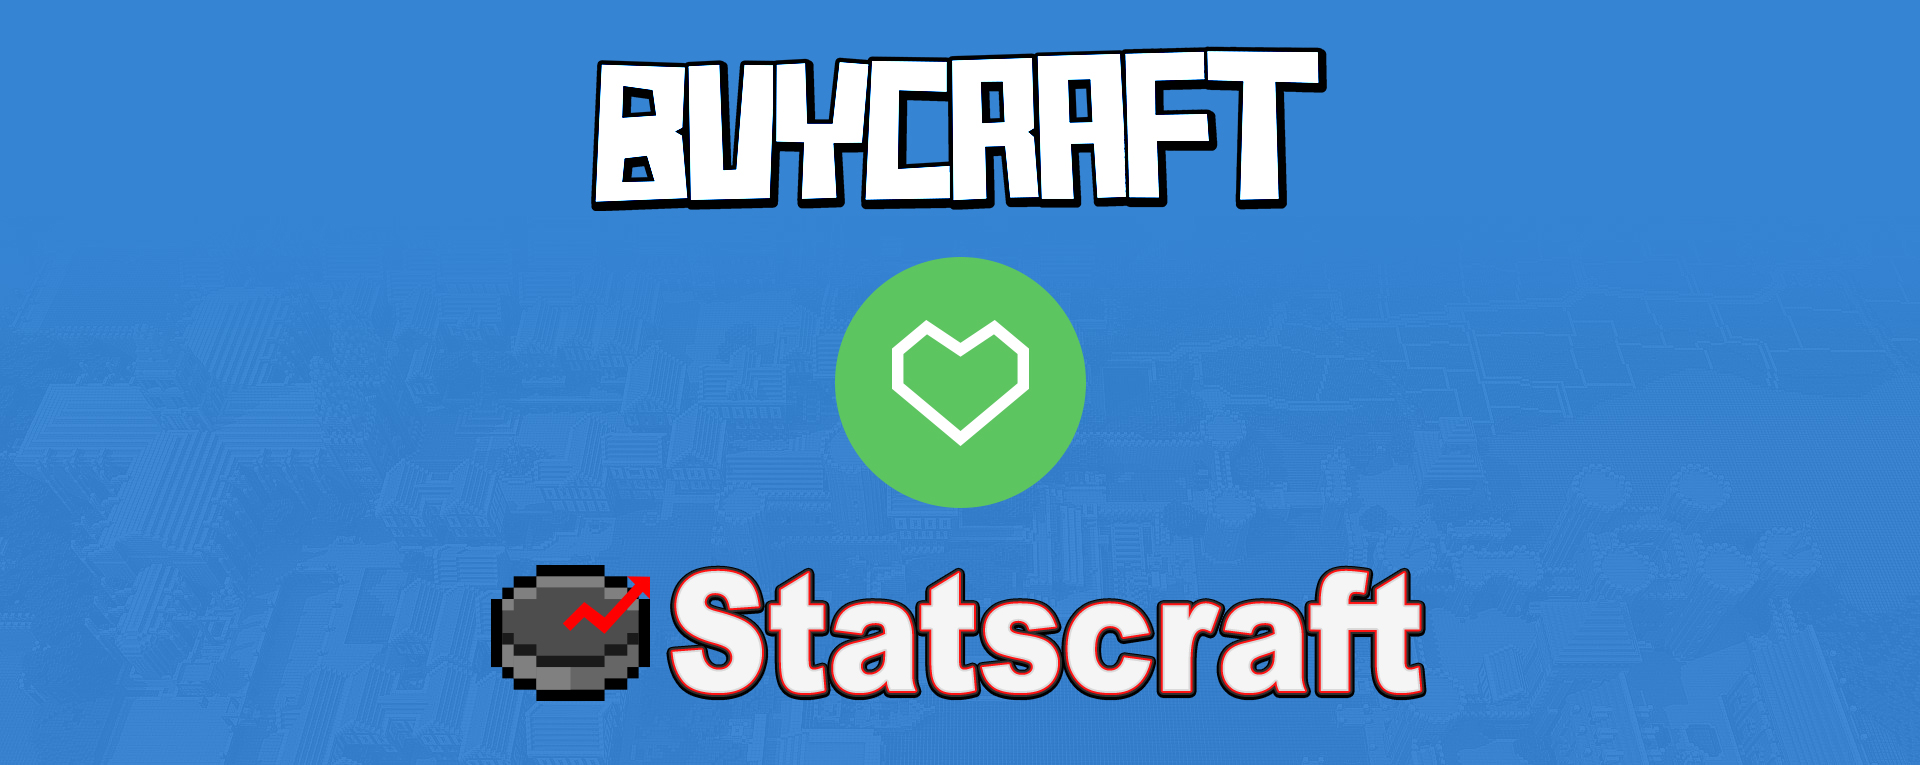 Welcoming Statscraft to the Buycraft family